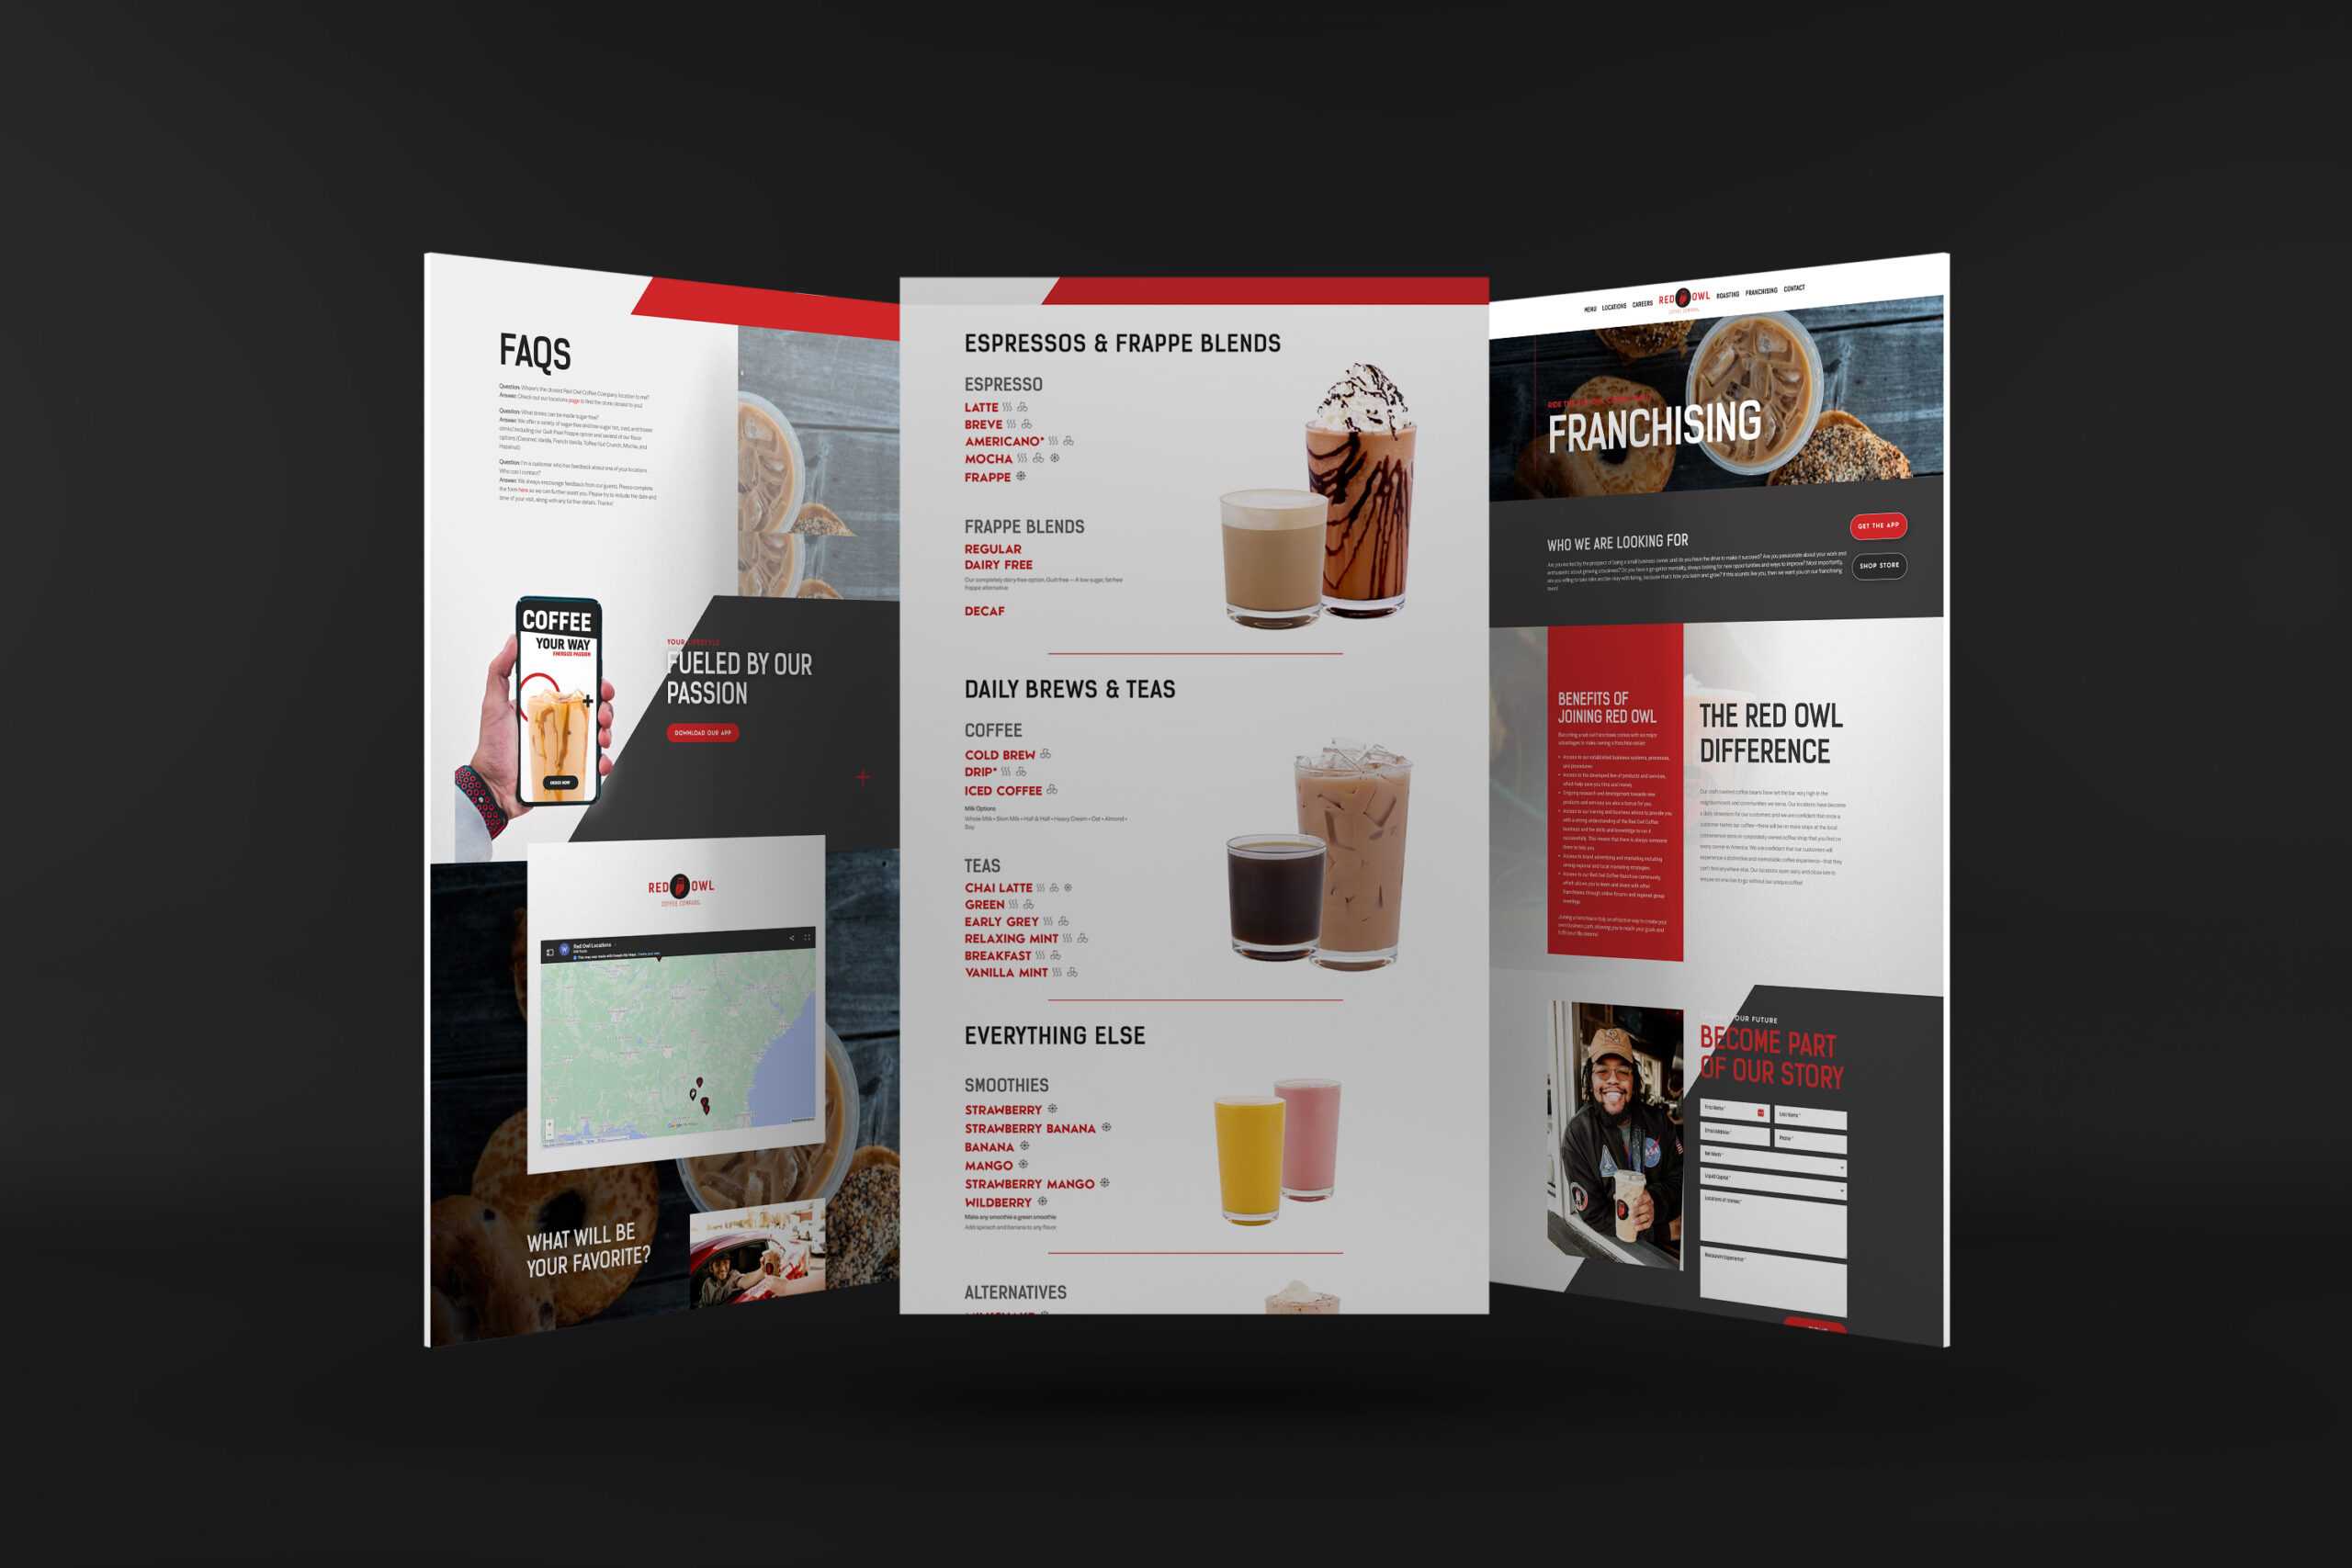 Screenshots of the Homepage, Menu page, and Roasting page from Red Owl Coffee Company's website designed by Riverworks.